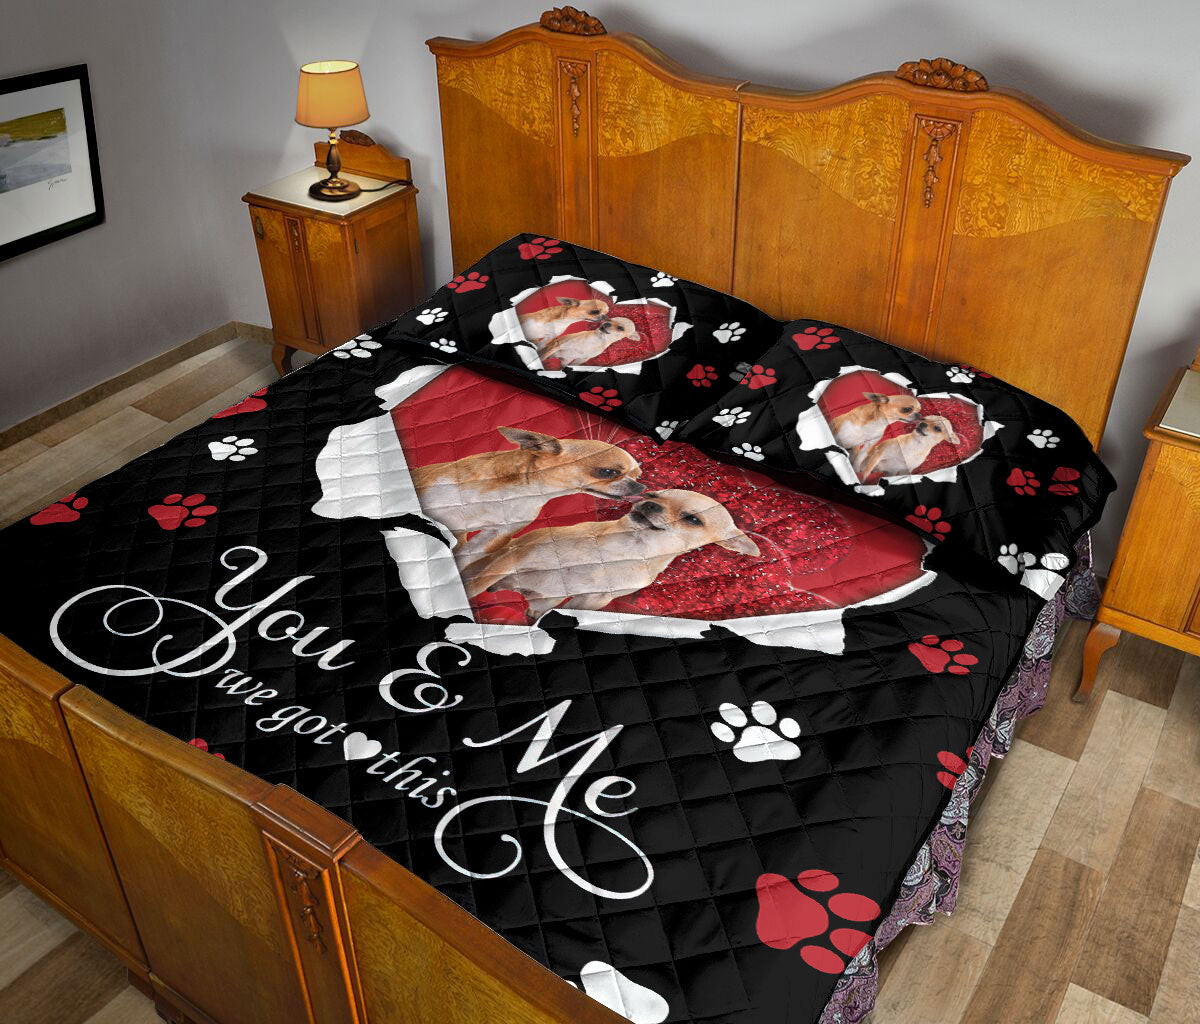 Ohaprints-Quilt-Bed-Set-Pillowcase-Dachshund-Weiner-Doxie-Couple-Dog-Lover-Love-Adorable-Heart-Blanket-Bedspread-Bedding-200-Queen (80'' x 90'')